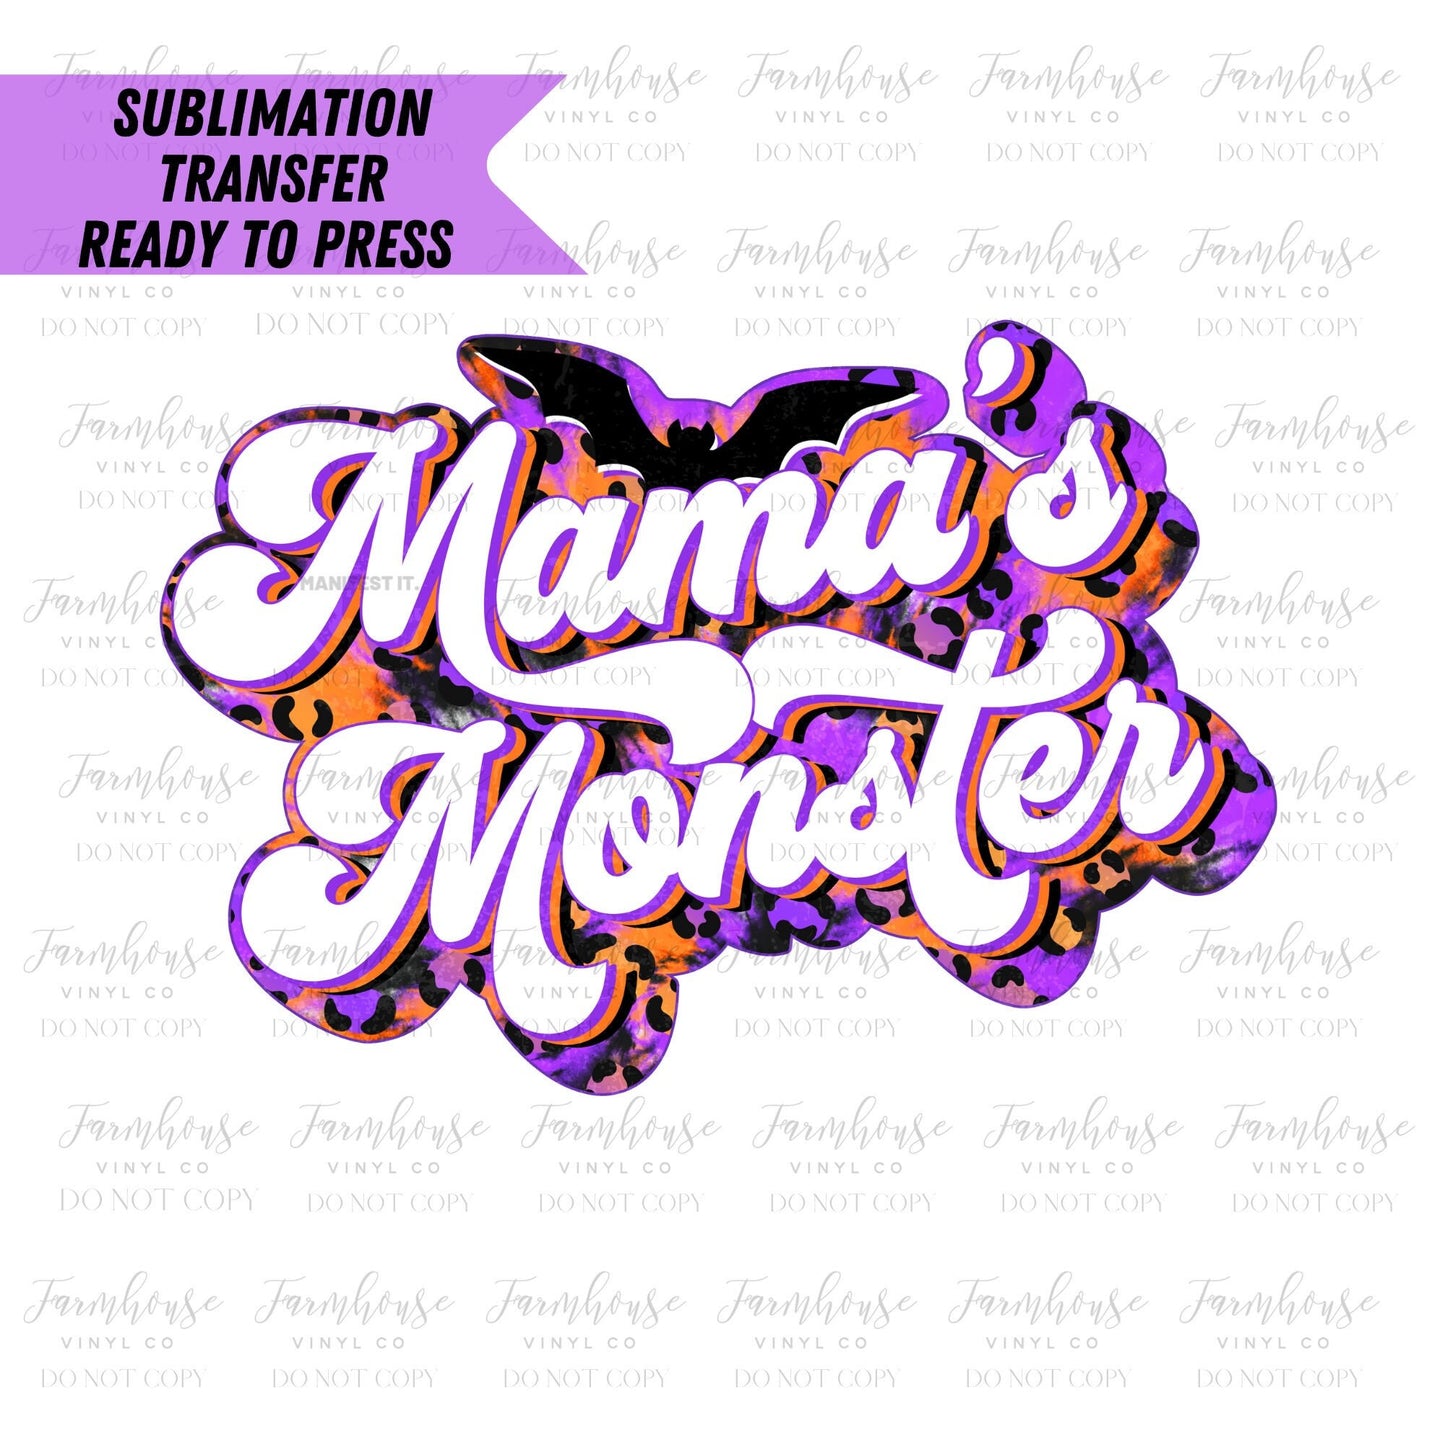 Mama’s Monster Halloween, Reasy to Press Sublimation Transfer, Trick or Treat Design, Sublimation Transfer, Kids Halloween Design Transfer